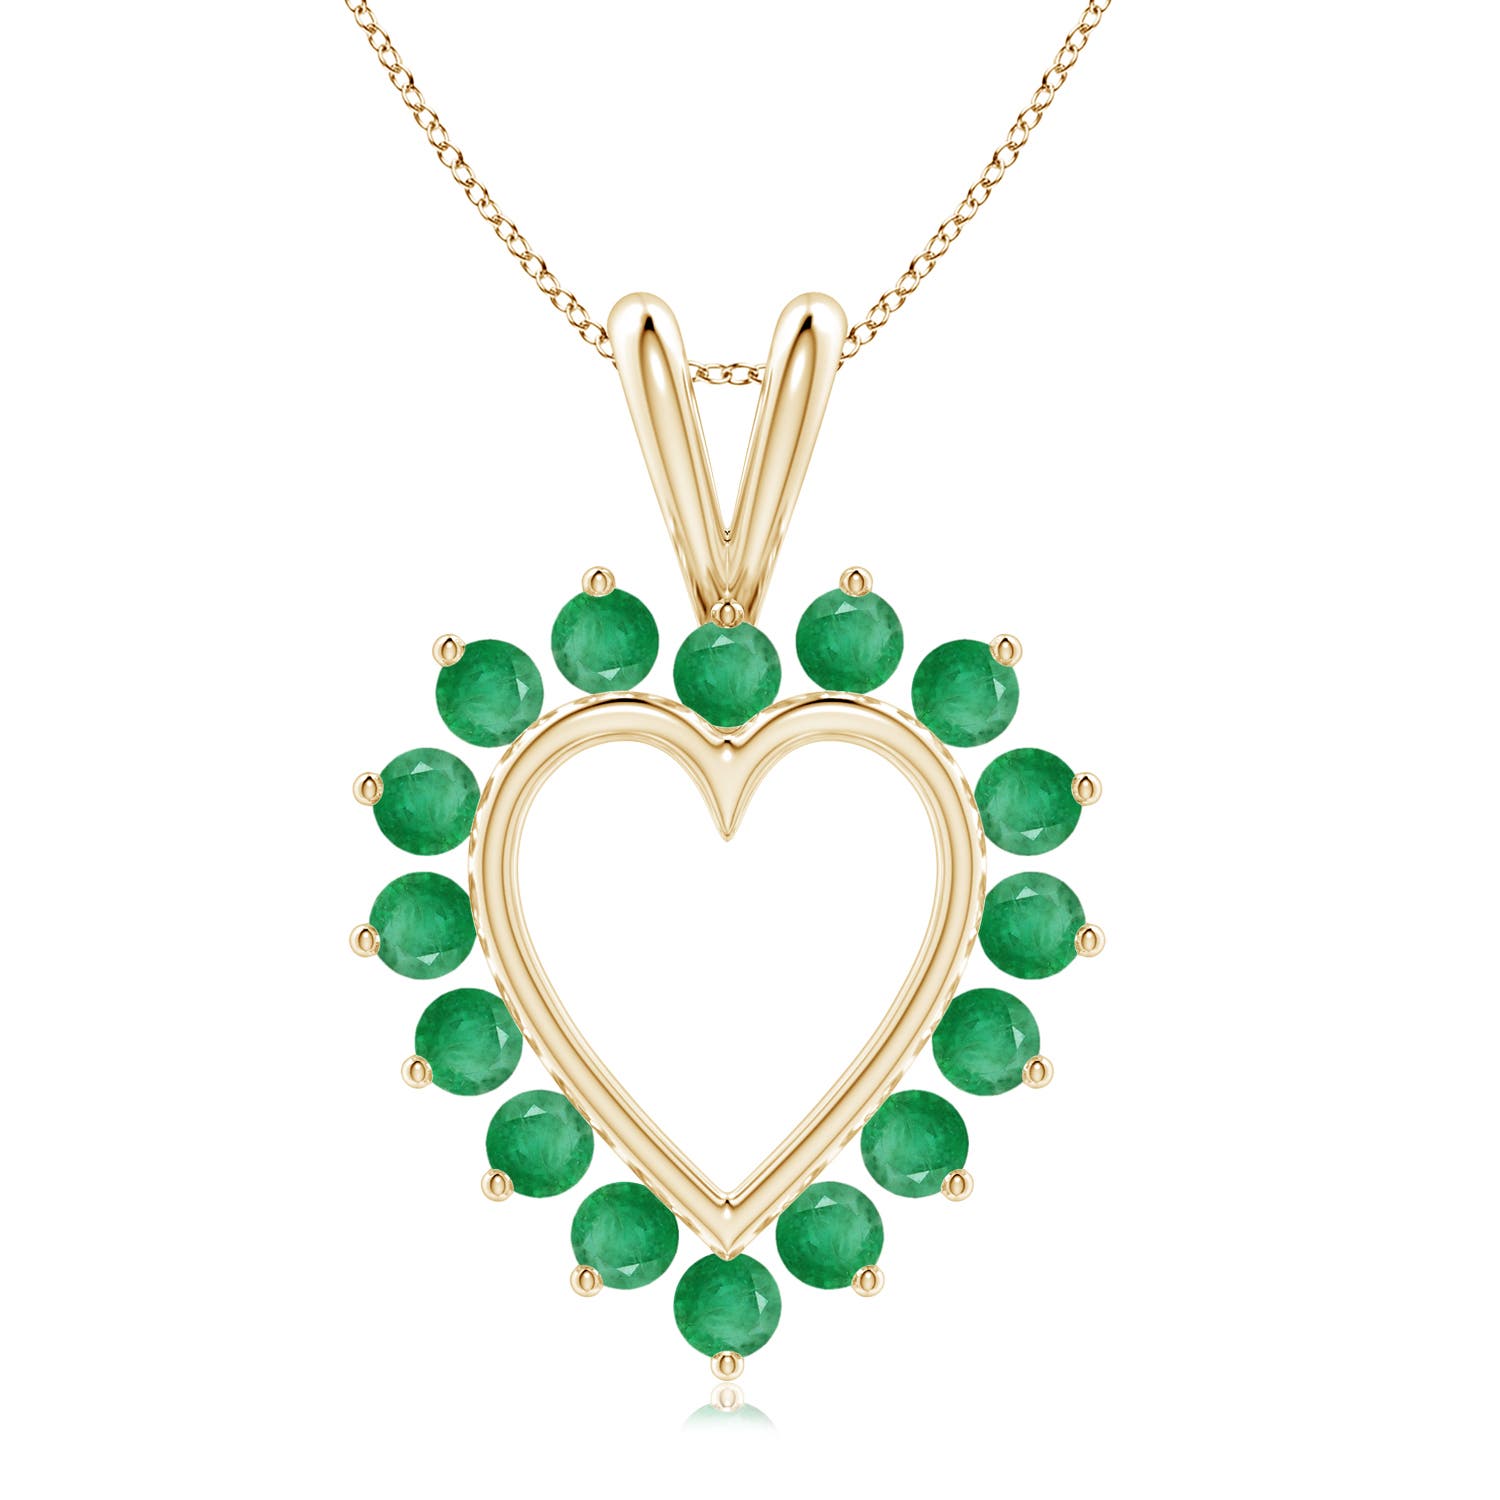 A - Emerald / 0.72 CT / 14 KT Yellow Gold